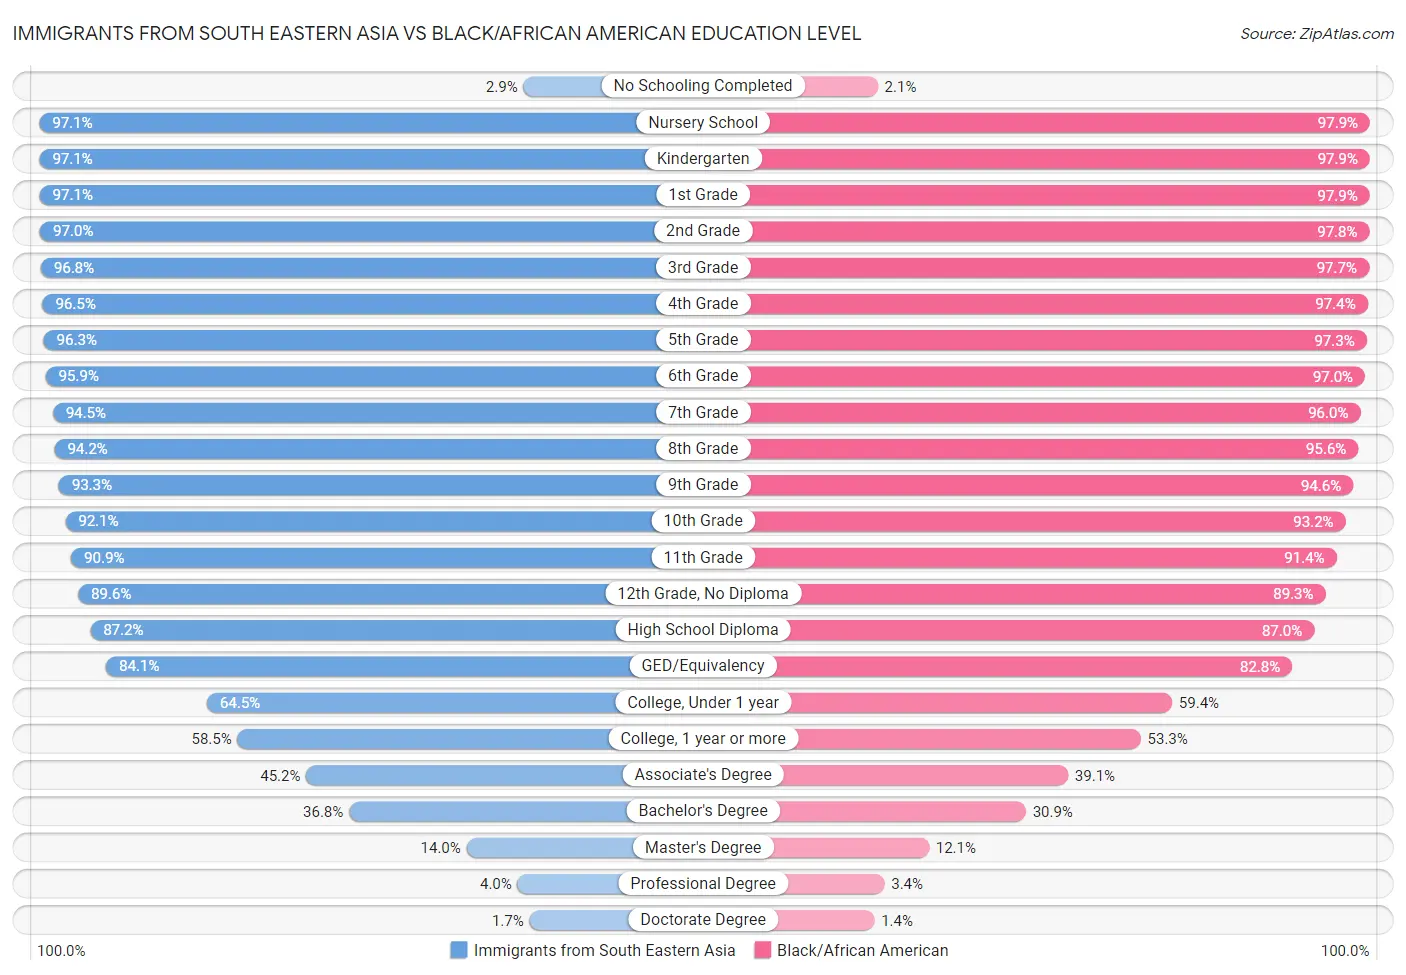 Immigrants from South Eastern Asia vs Black/African American Education Level